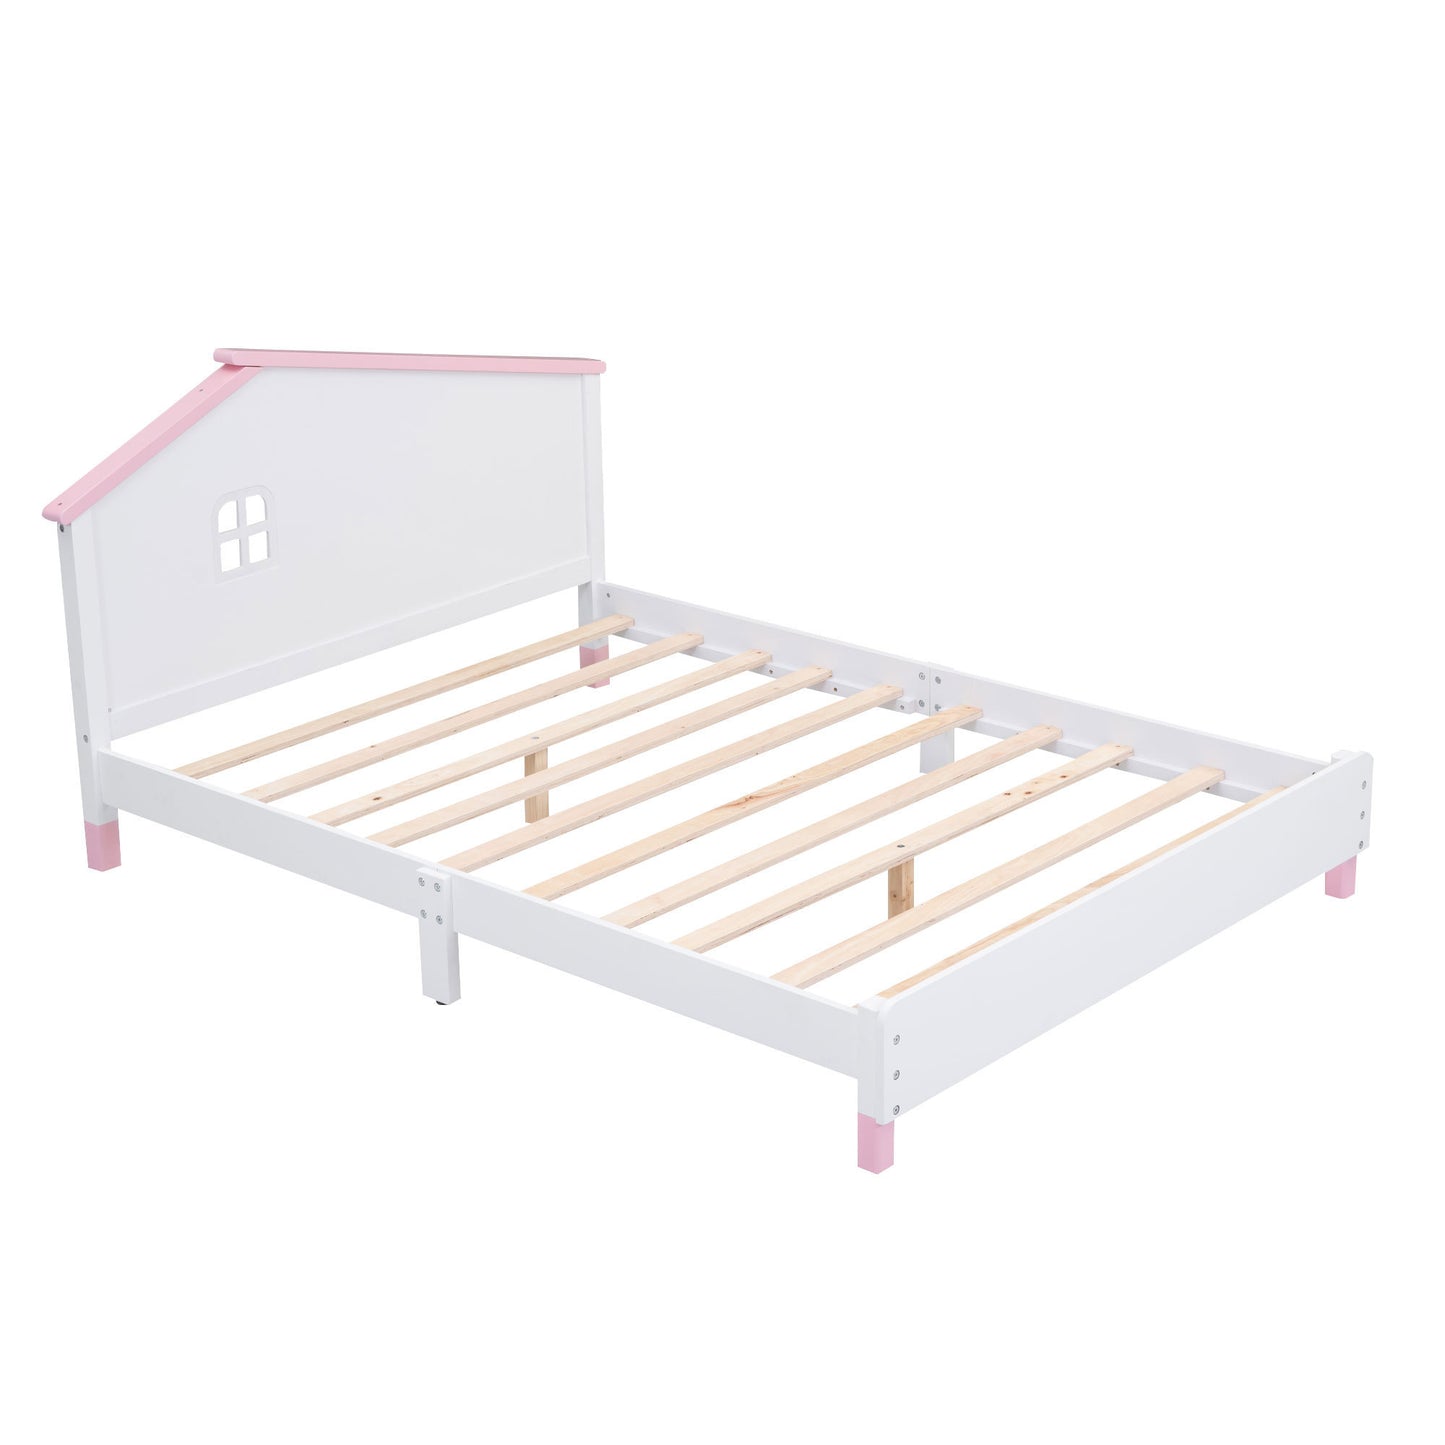 3-Pieces Bedroom Sets Full Size Platform Bed with Nightstand and Storage dresser,White+Pink